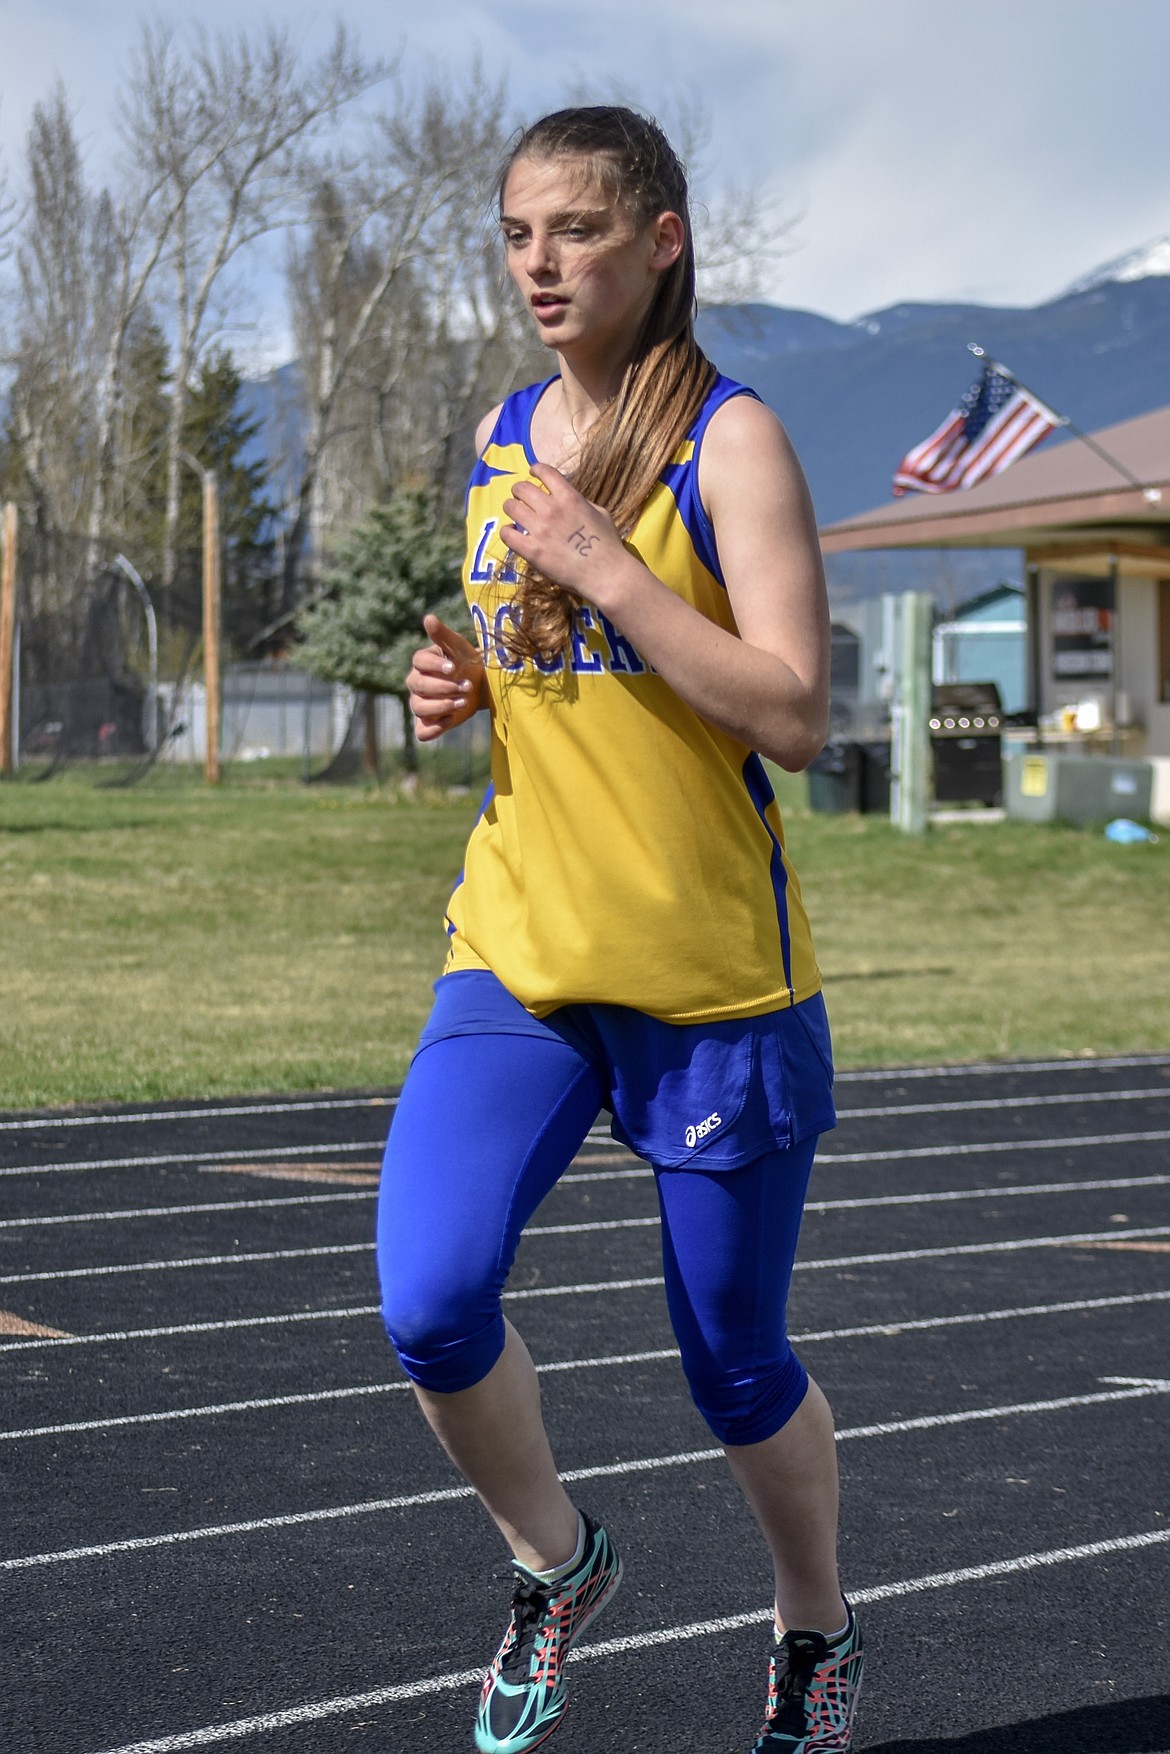 Libby freshman Halona LaFleur competes in the 1,600m run at the Lincoln County Track Meet Tuesday. (Benjamin Kibbey/The Western News)